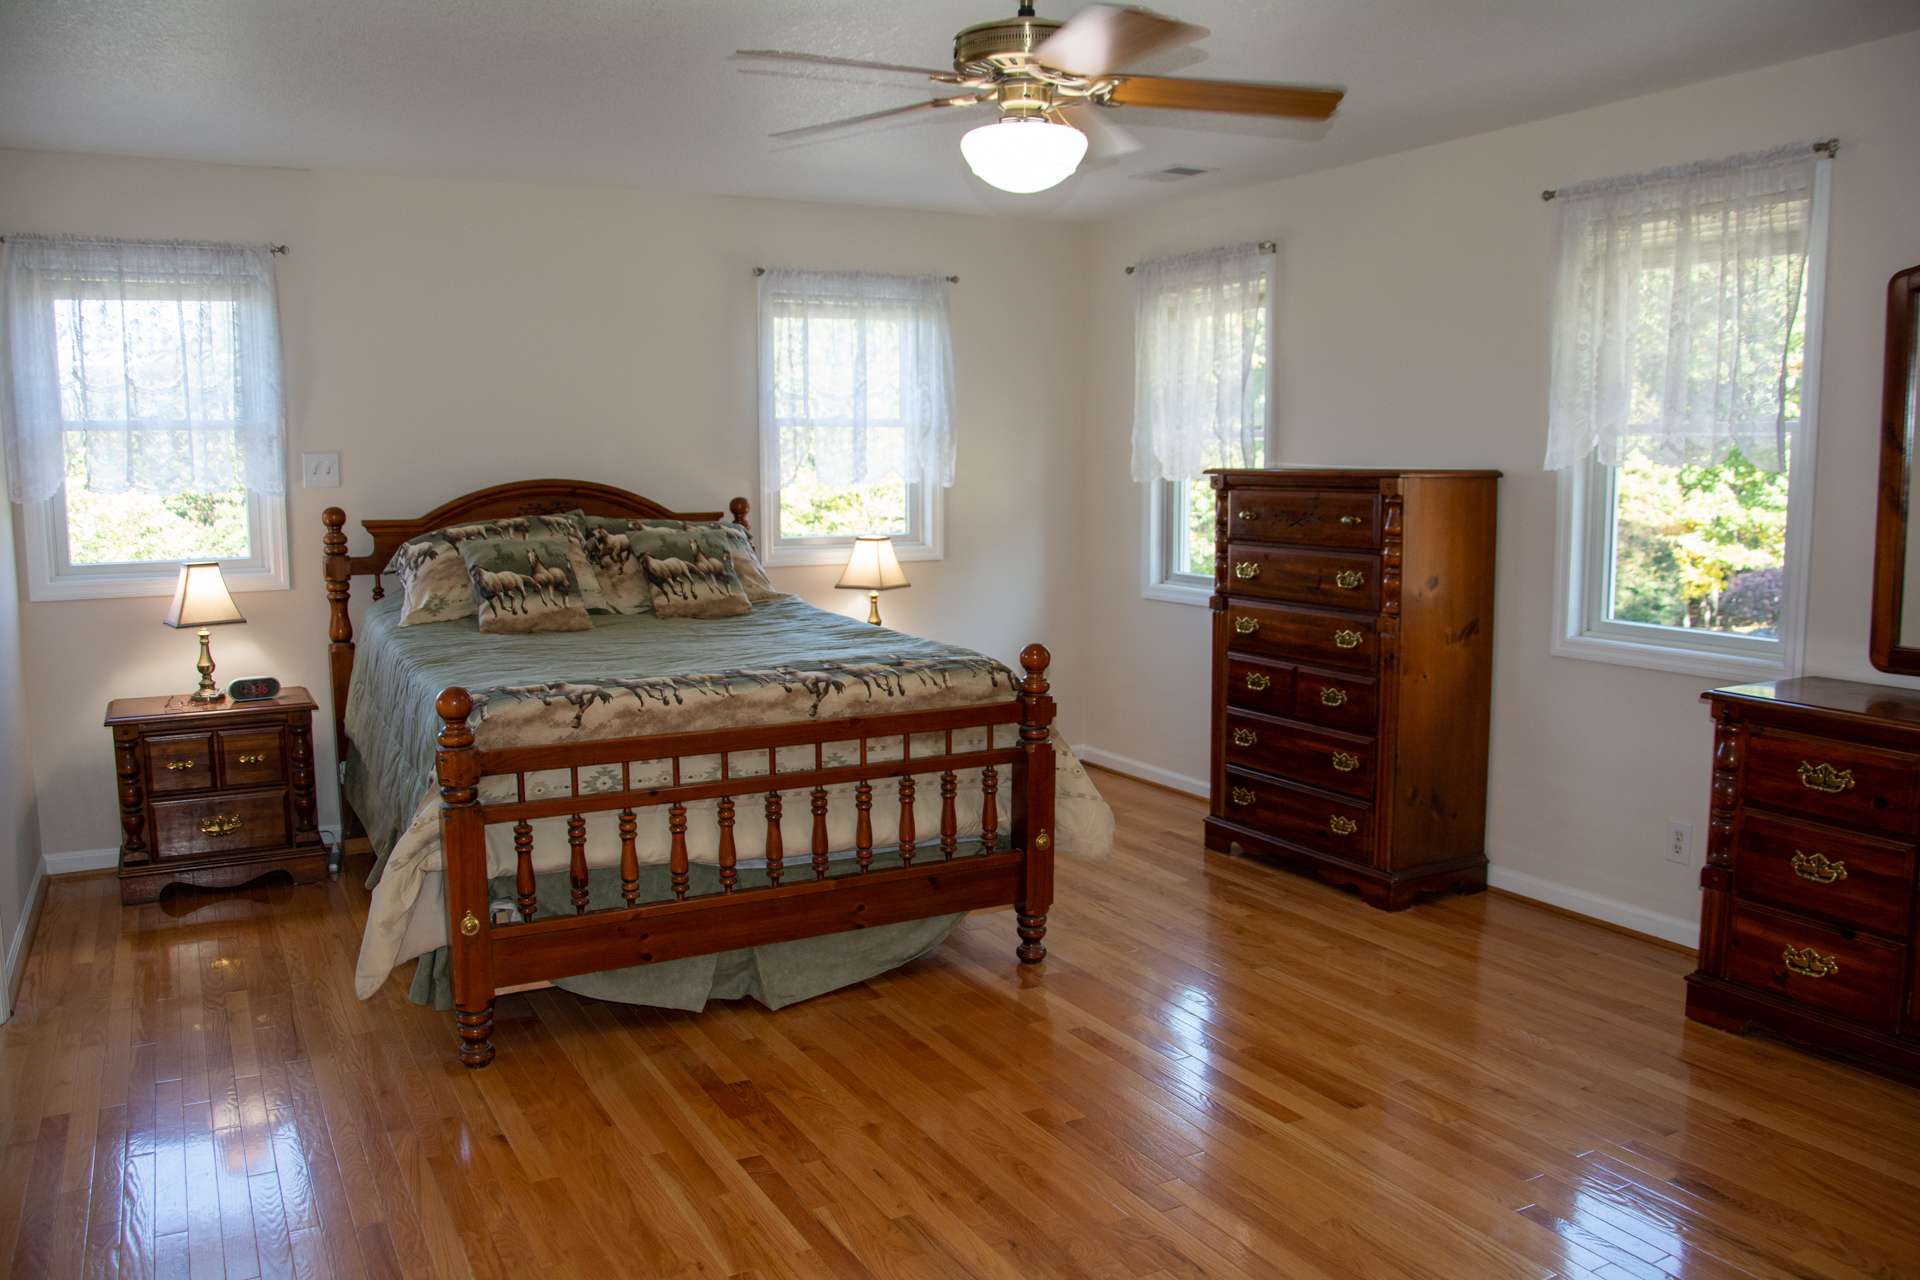 The sizeable master suite is located on the upper level and features 5 windows.